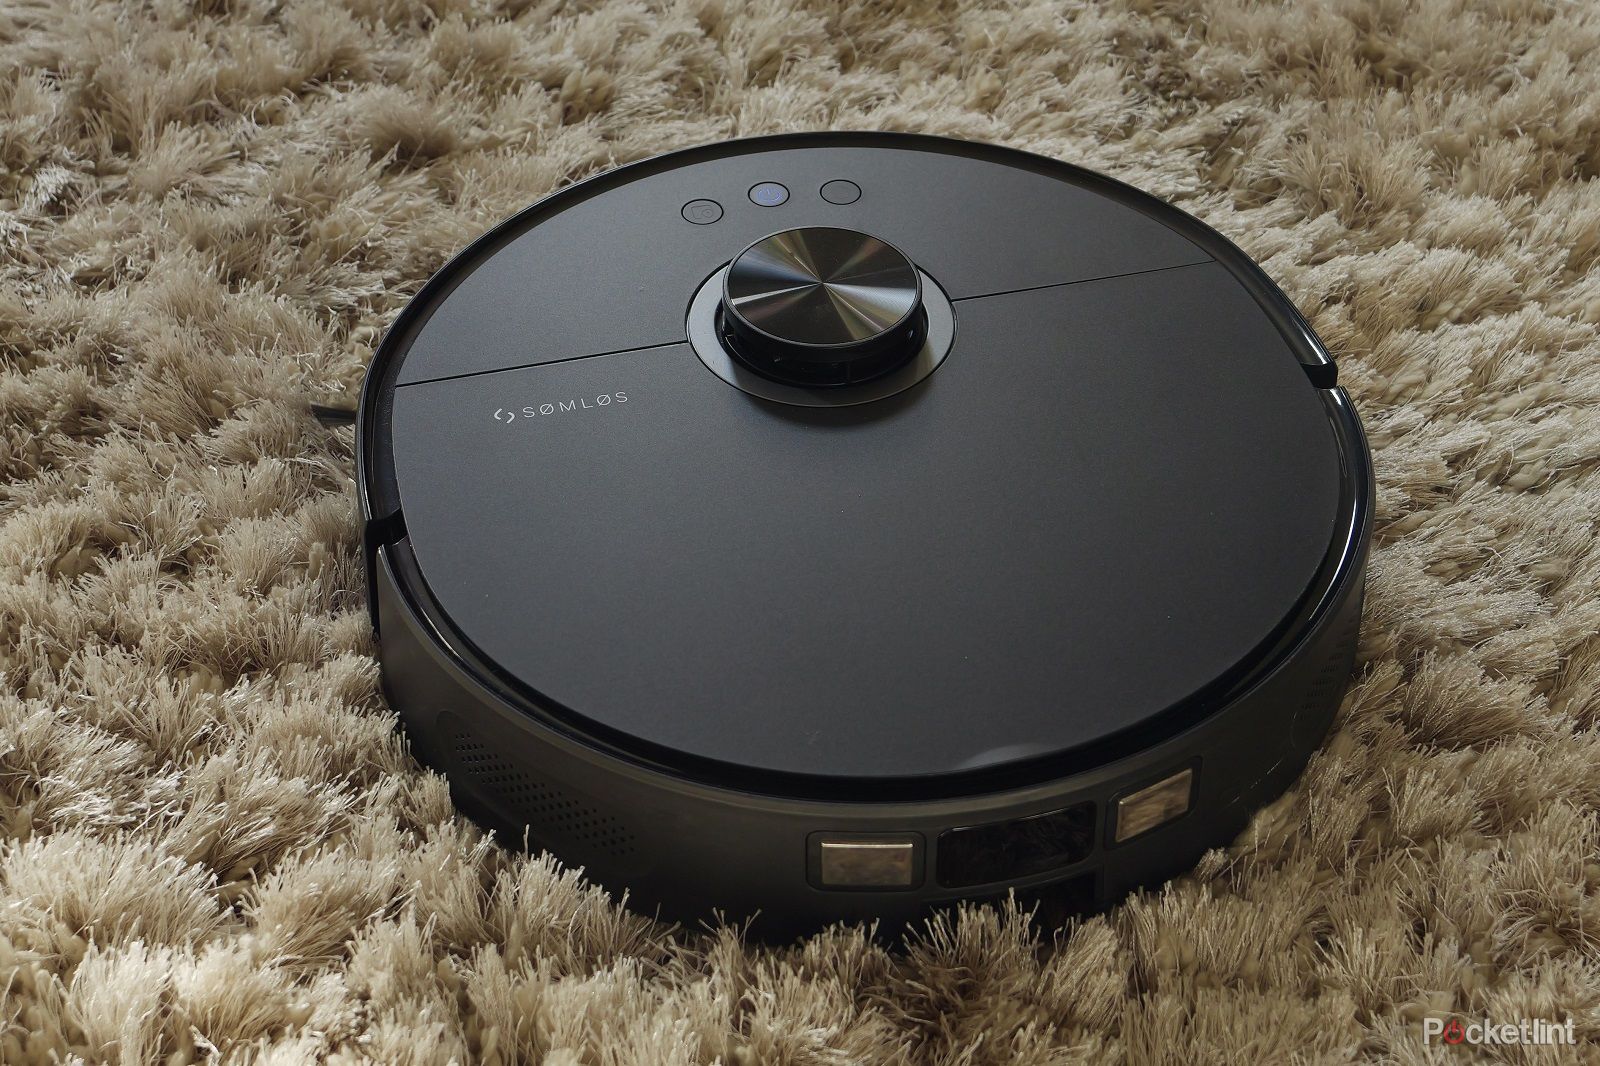 Somlos S2 Robot Vacuum Cleaner Review stuck on things 3